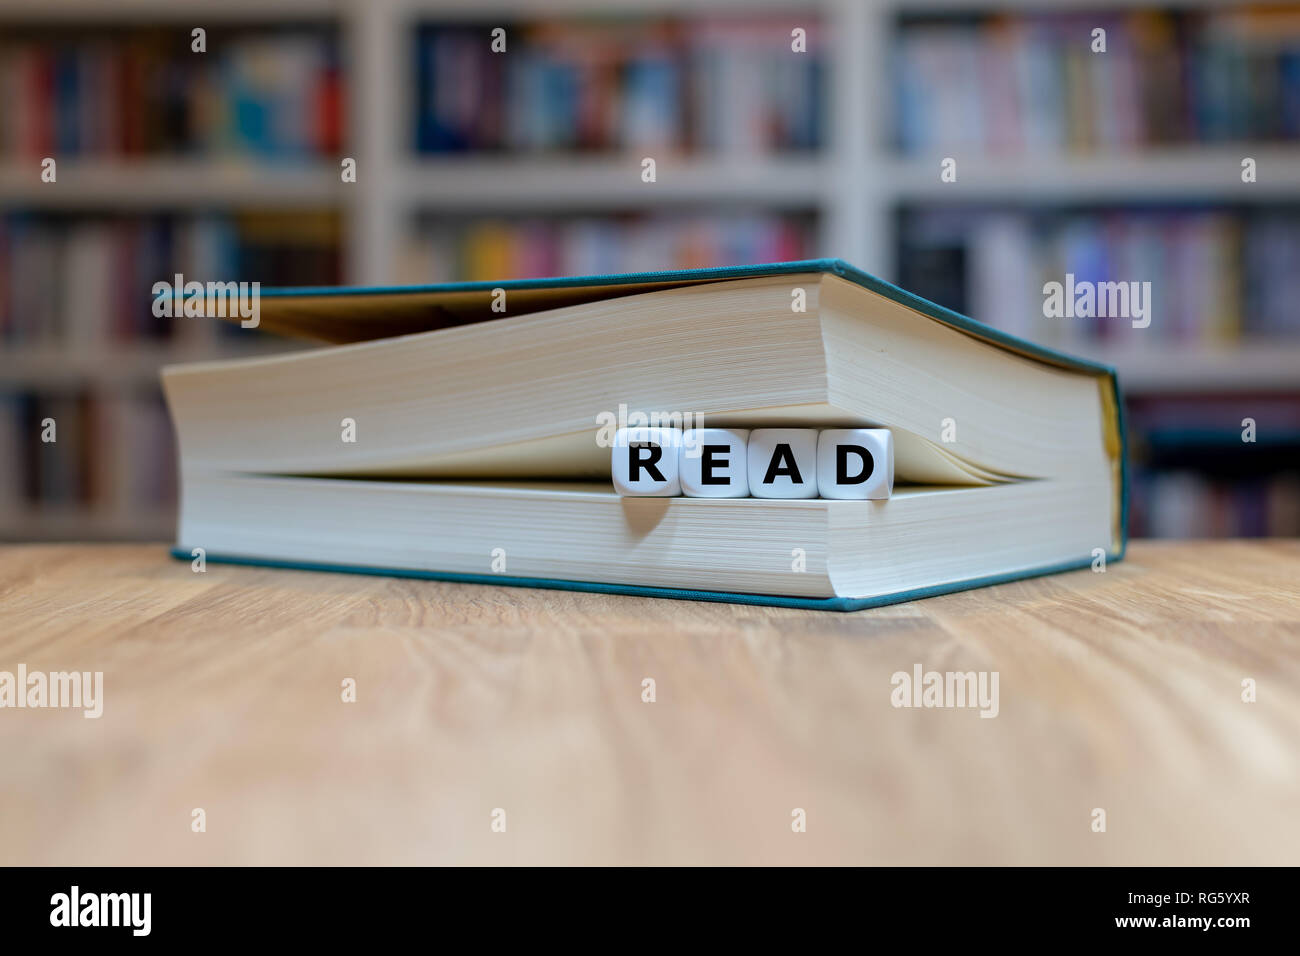 Dice in a book form the word 'read'. Book is lying on a wooden desk infront of a bookshelf. Stock Photo